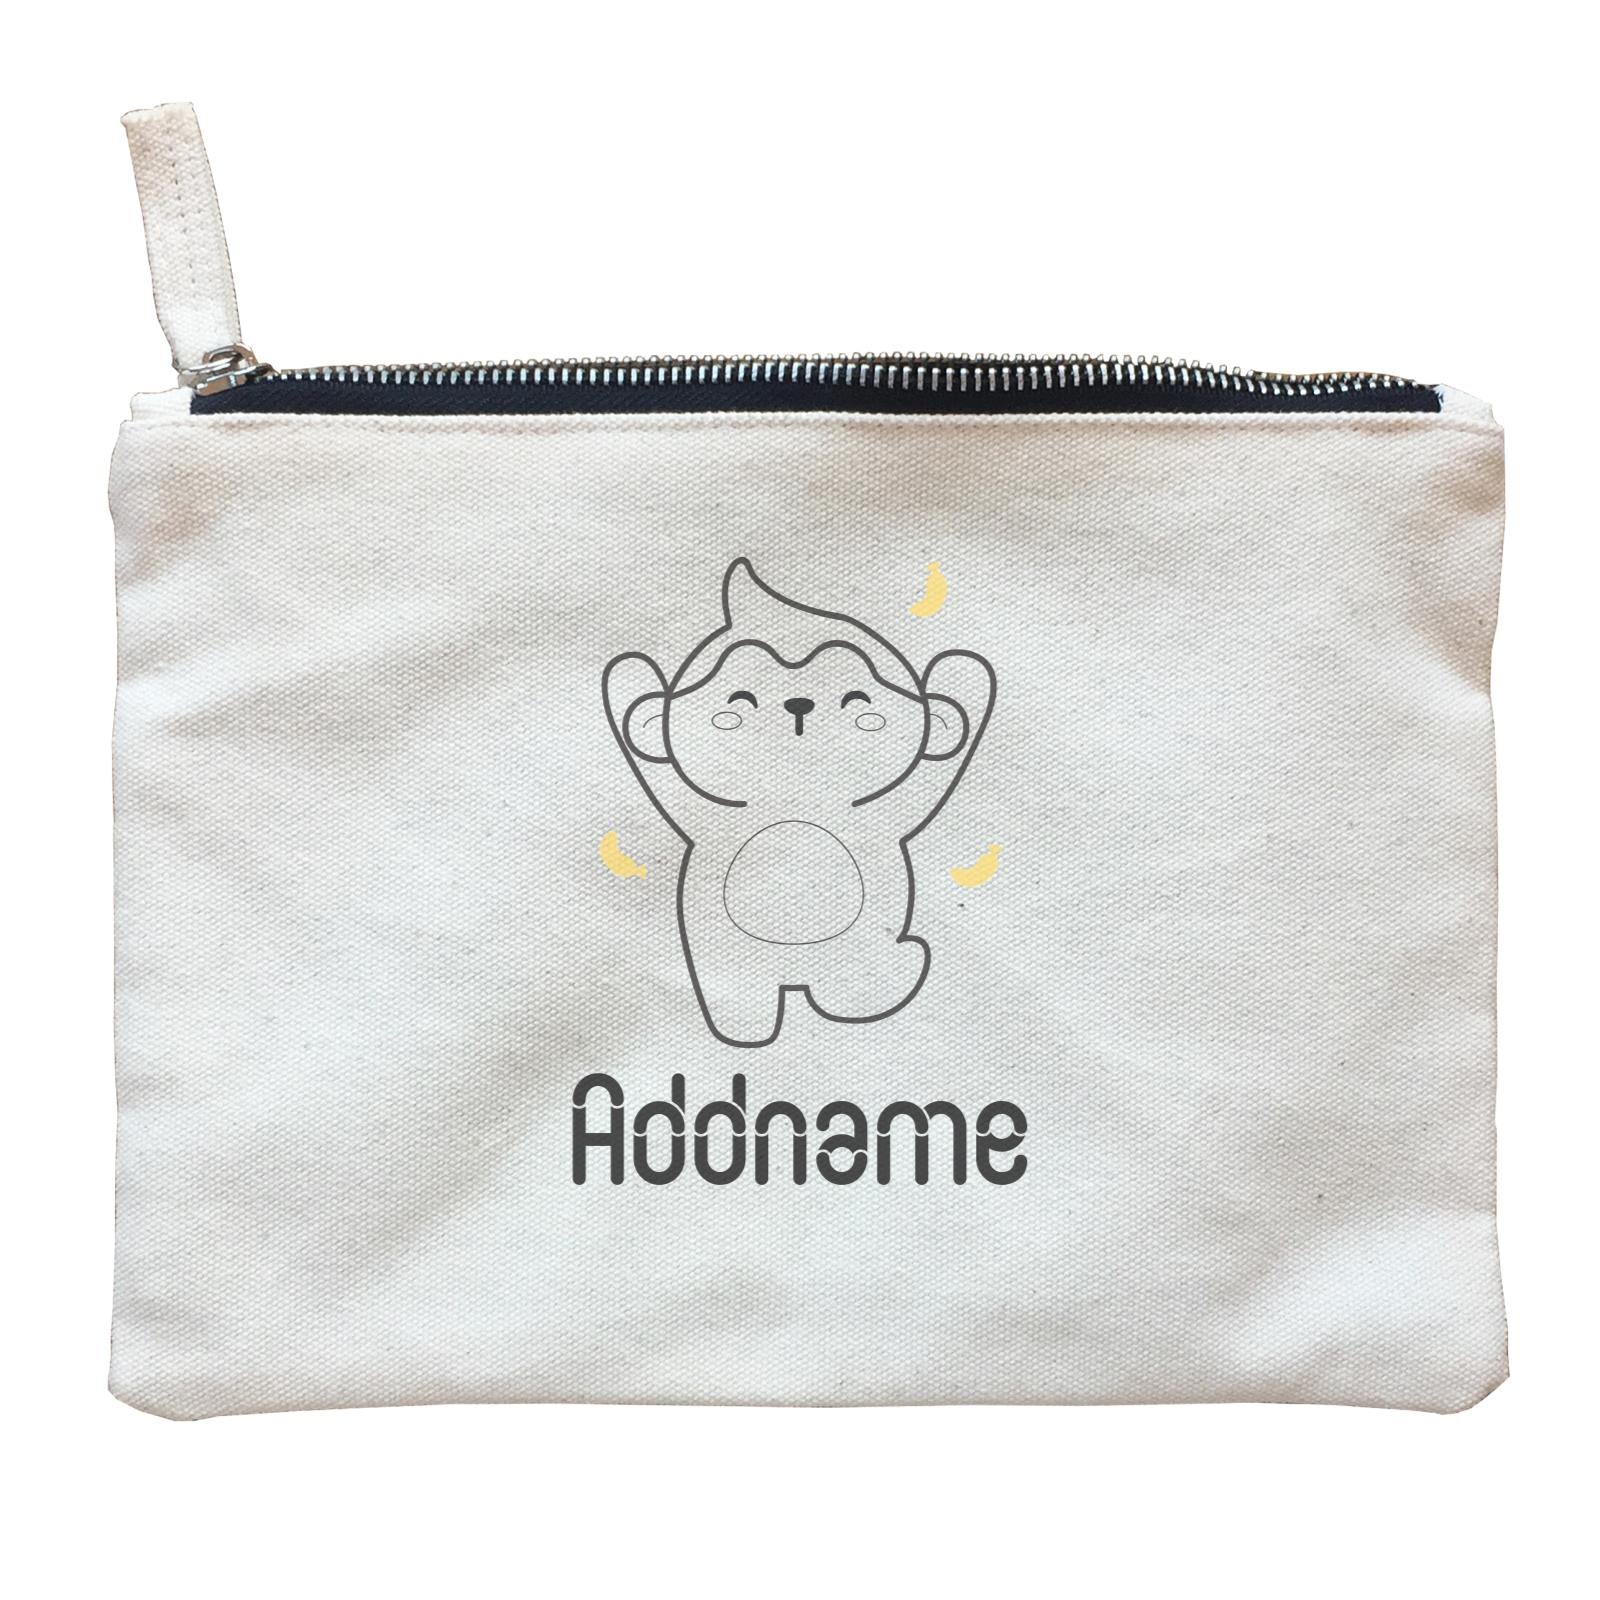 Coloring Outline Cute Hand Drawn Animals Furry Cheerful Monkey Addname Zipper Pouch